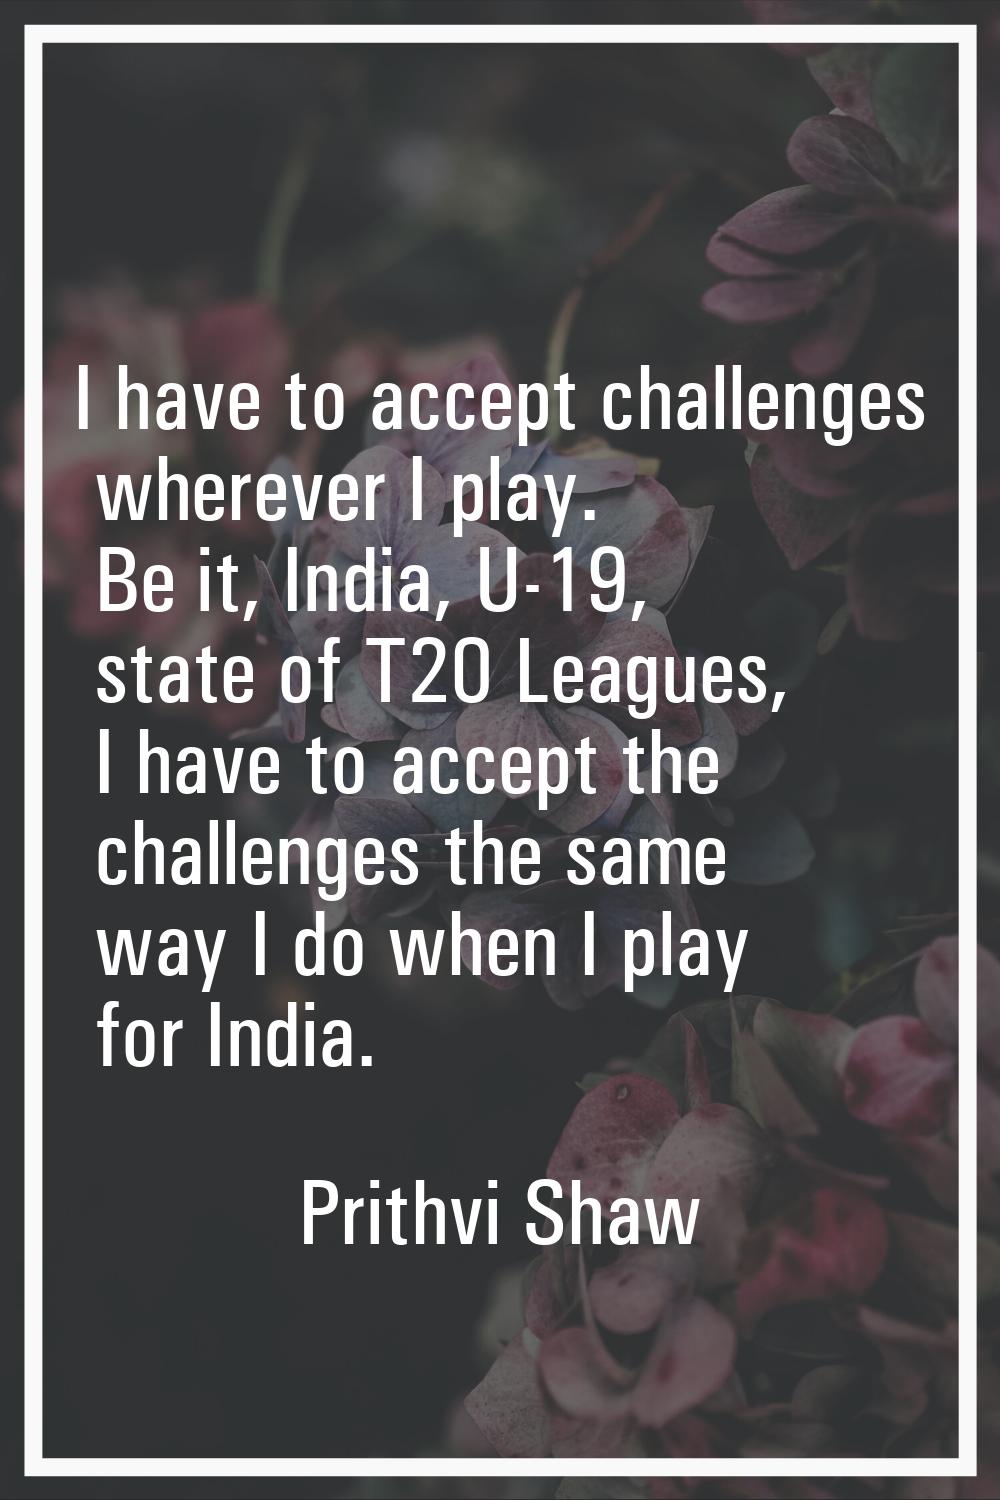 I have to accept challenges wherever I play. Be it, India, U-19, state of T20 Leagues, I have to ac